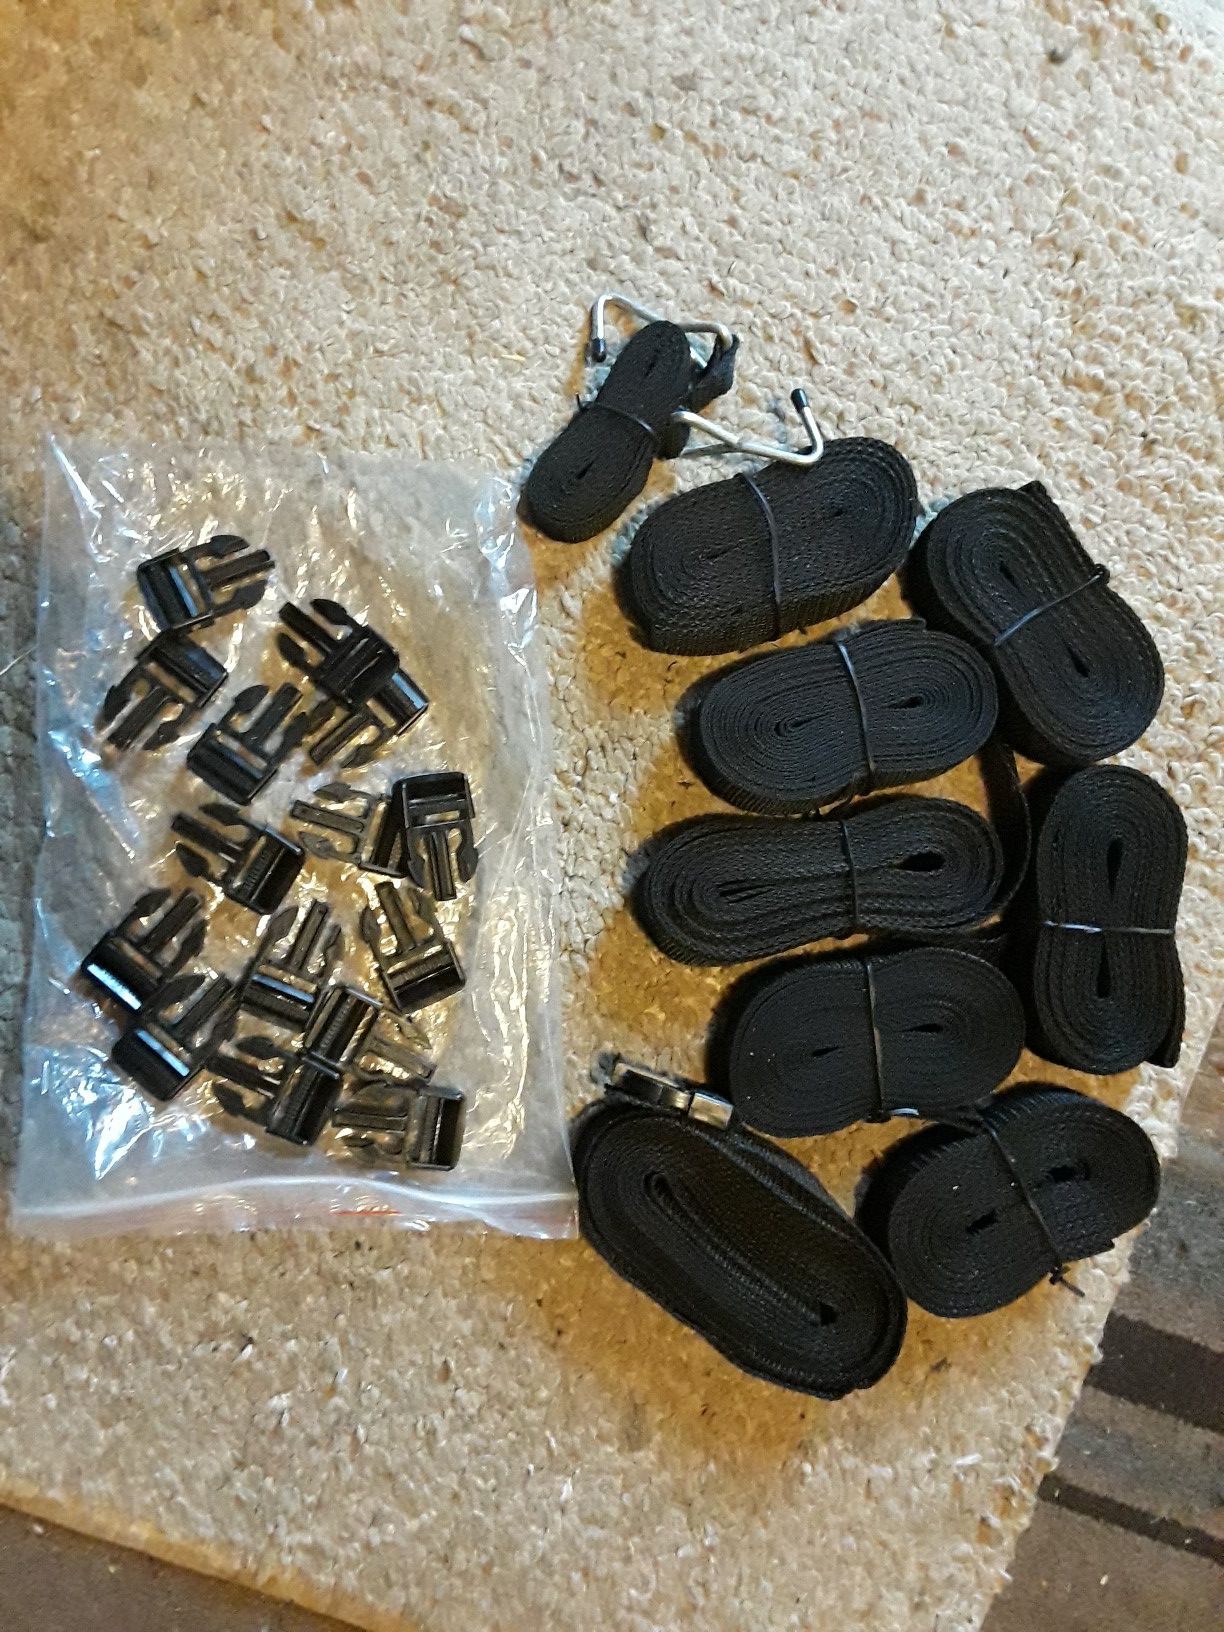 9 piece boat strap kit with quick release snaps